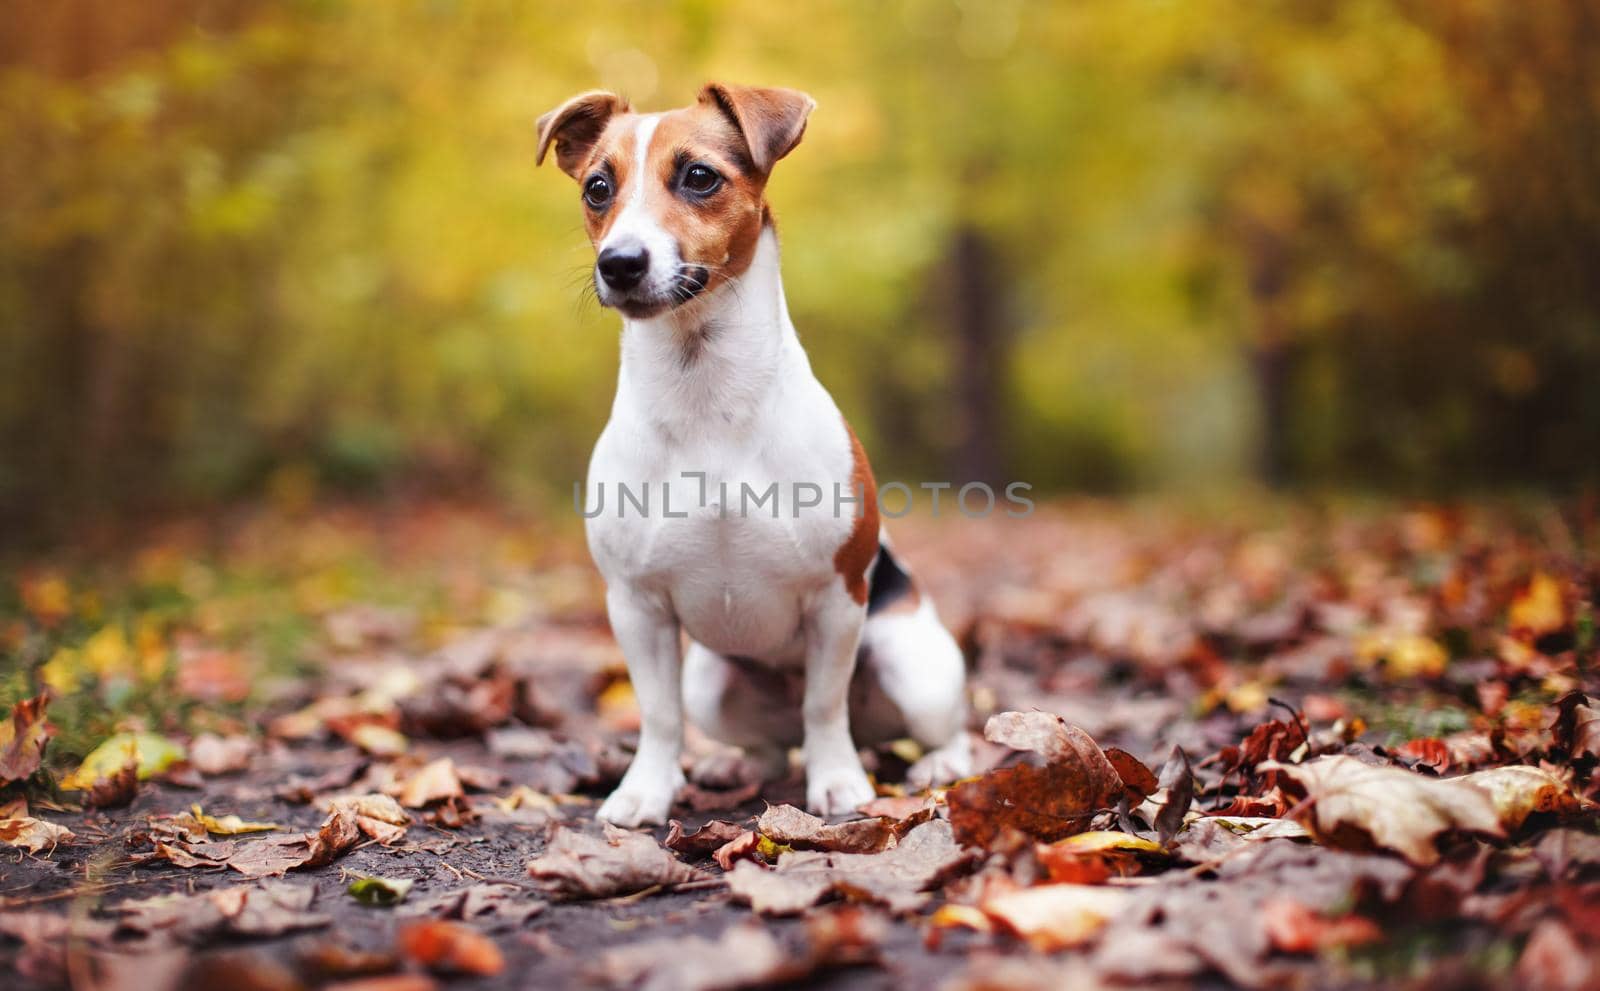 Small Jack Russell terrier dog sitting on brown leaves, nice blurred bokeh autumn background by Ivanko